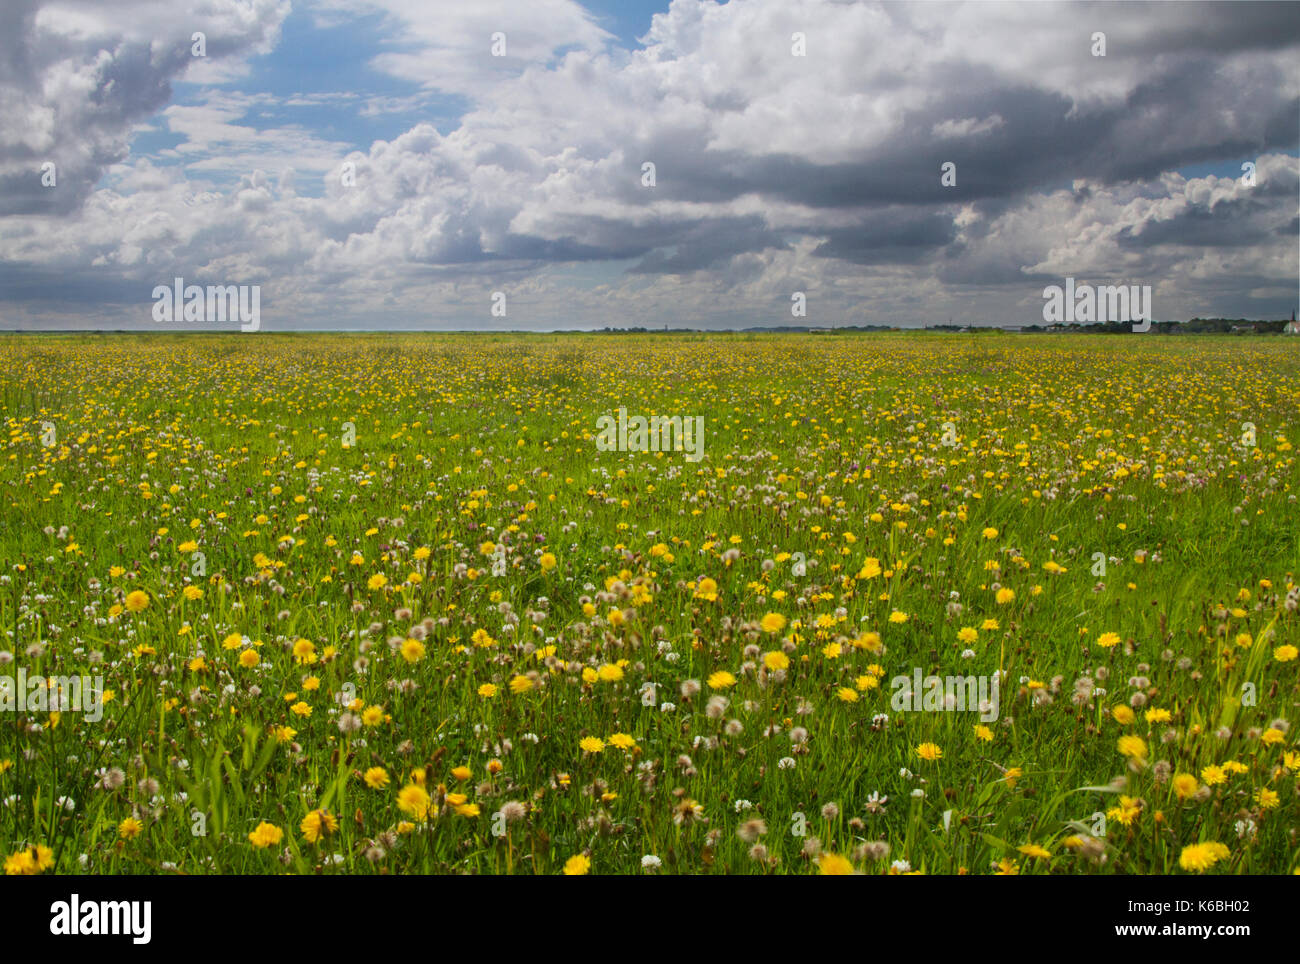 Meadow with lots of Dandelions under a blue sky with white and dark clouds Stock Photo